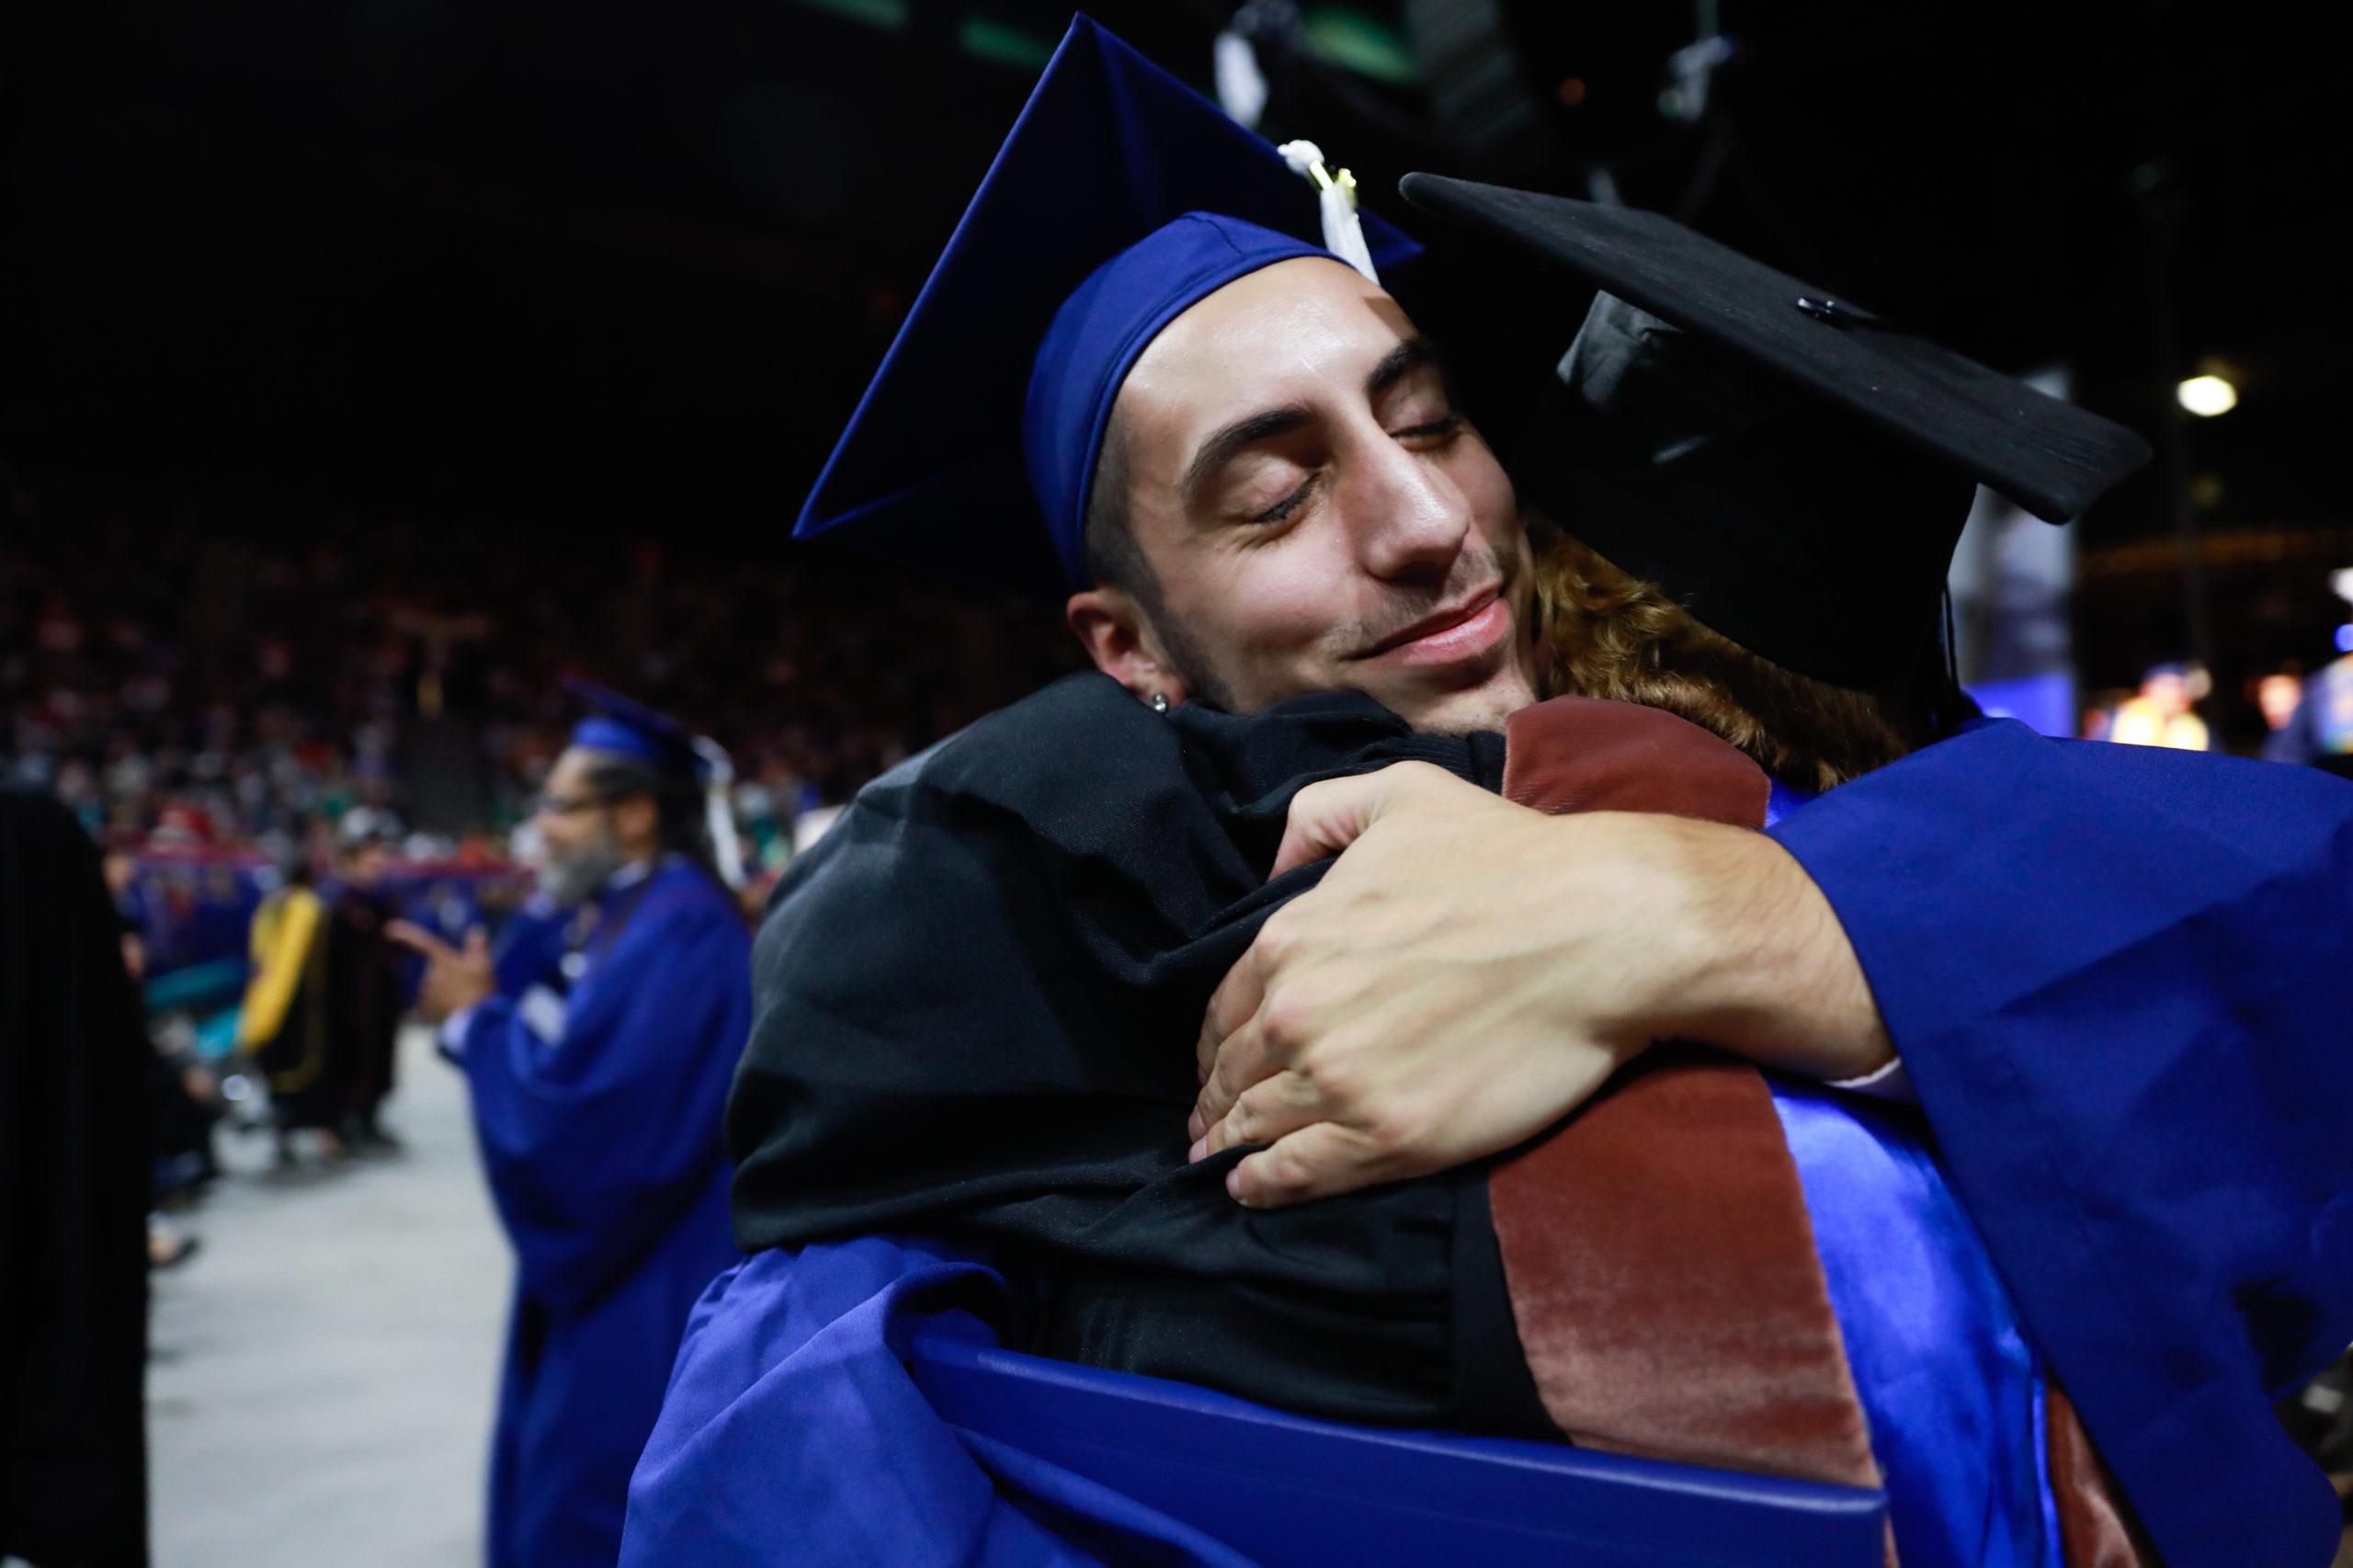 A faculty member hugs a student